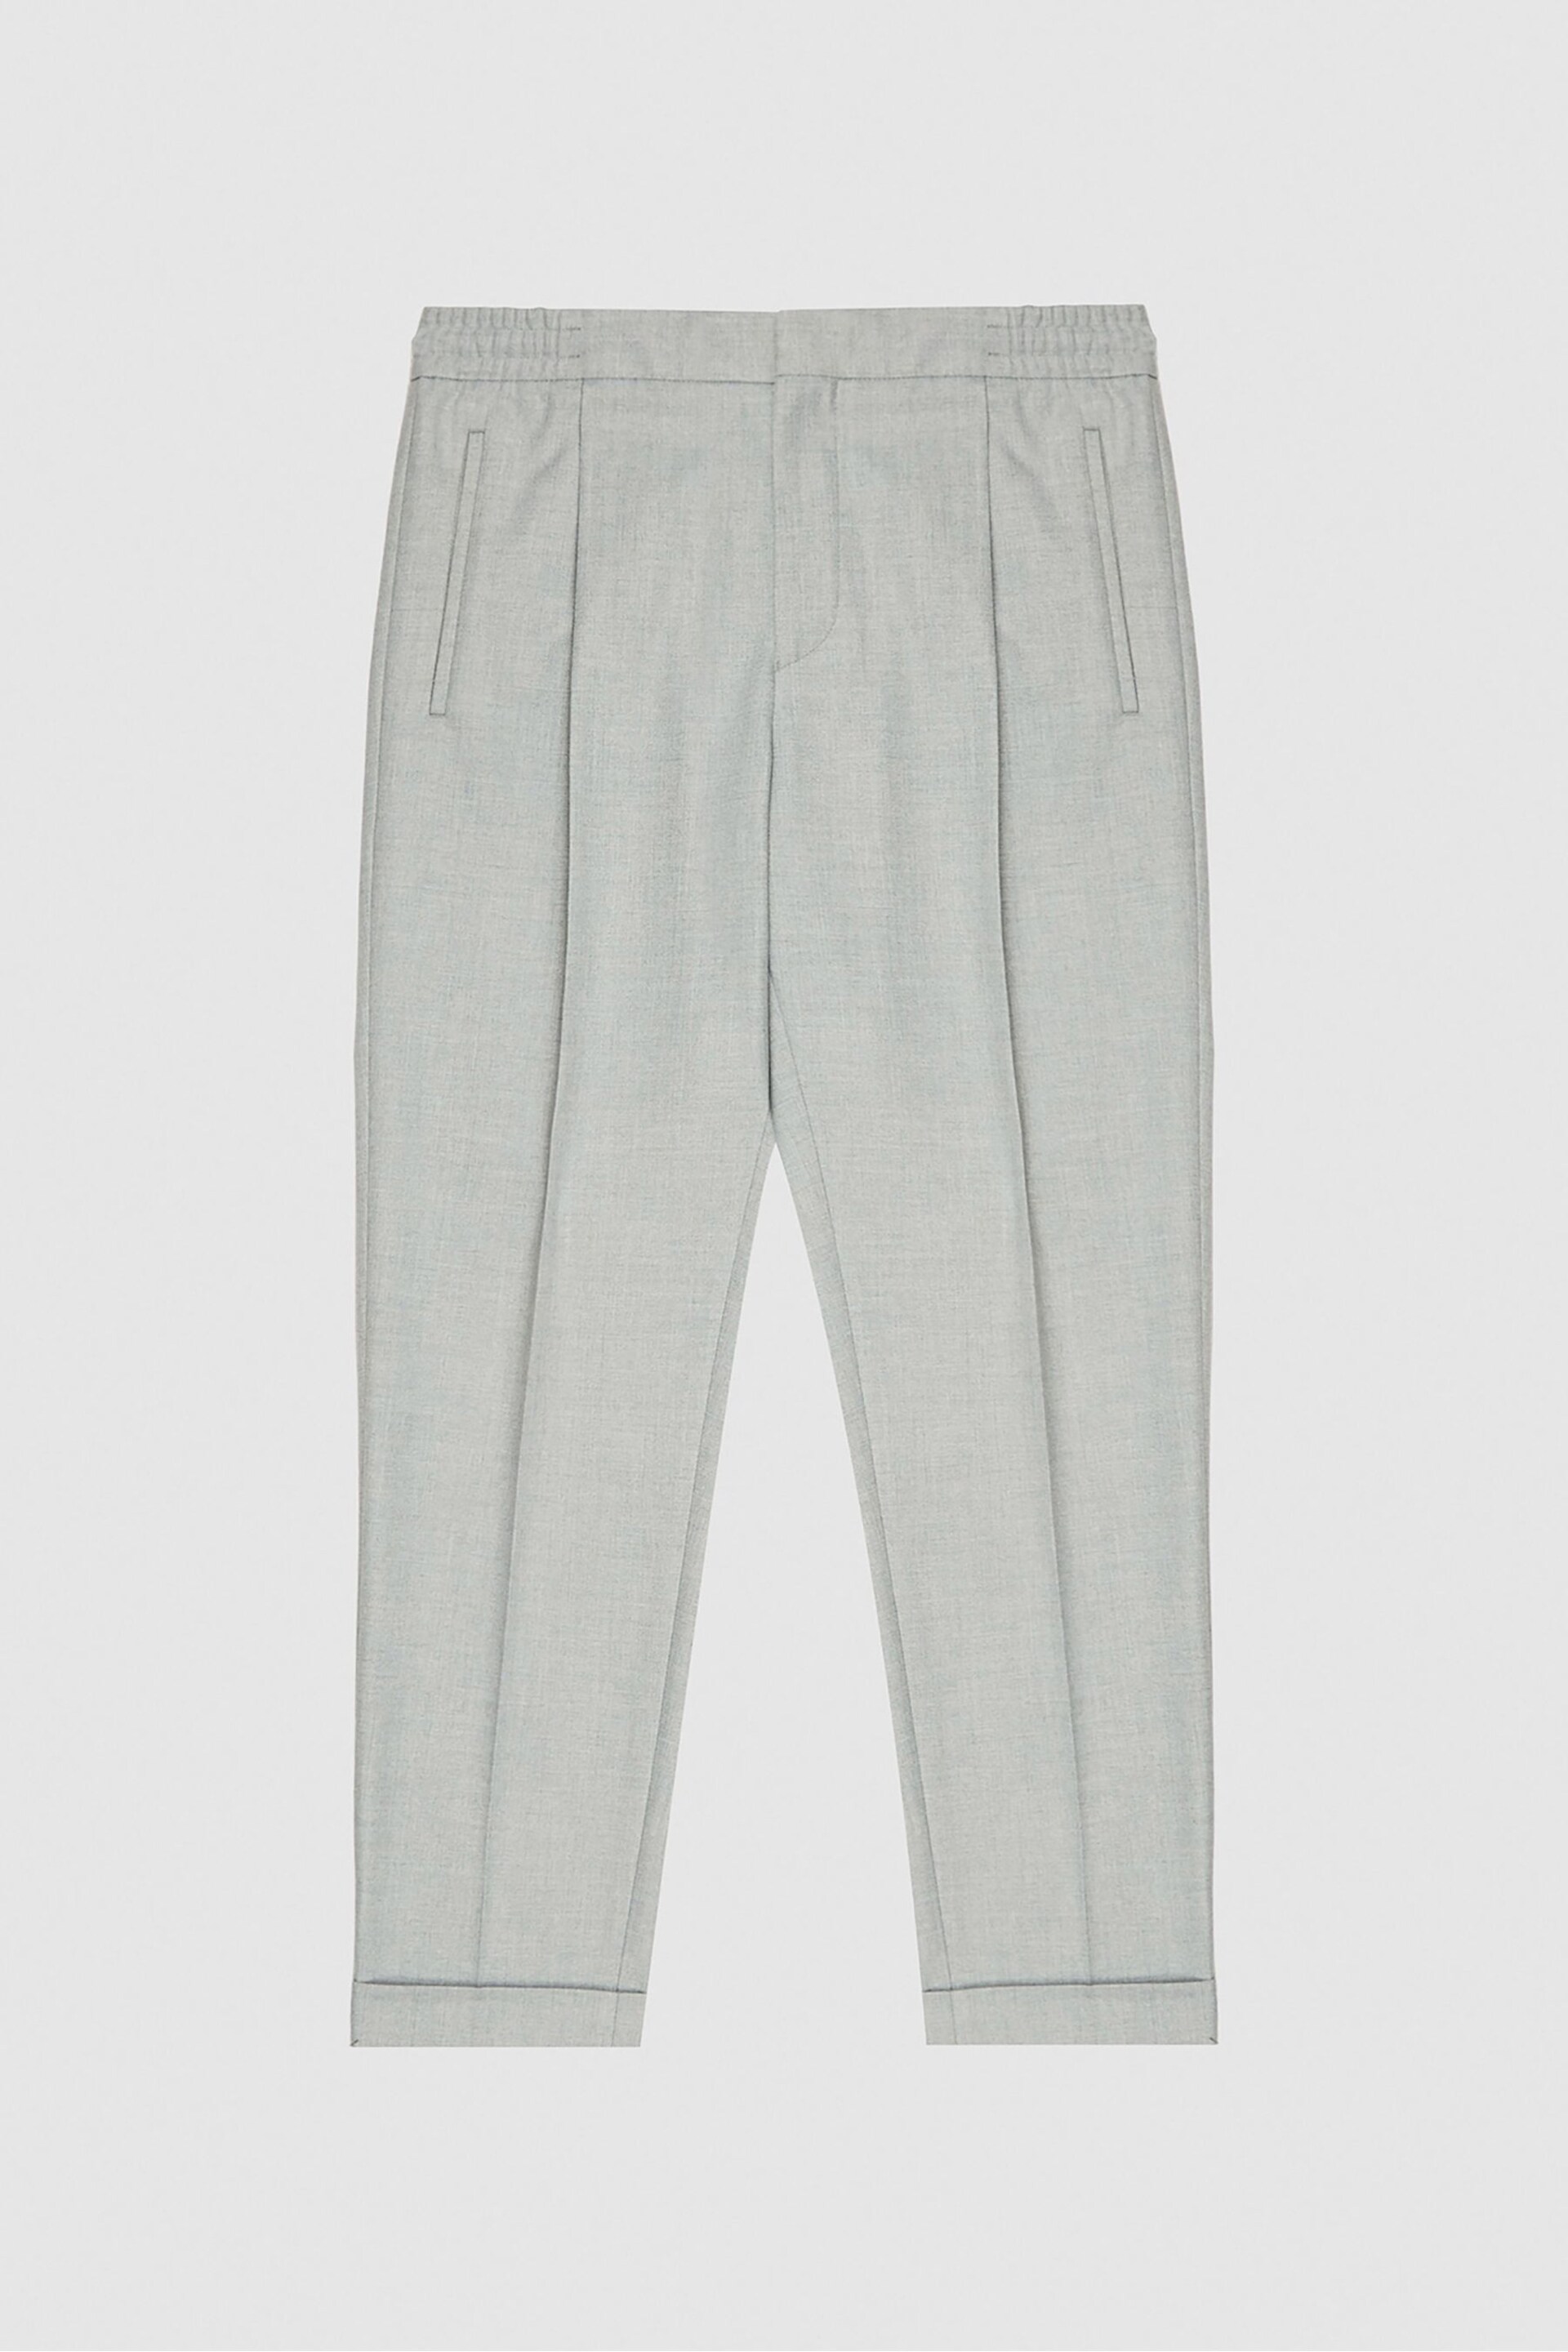 Reiss Soft Grey Brighton Relaxed Drawstring Trousers with Turn-Ups - Image 2 of 5